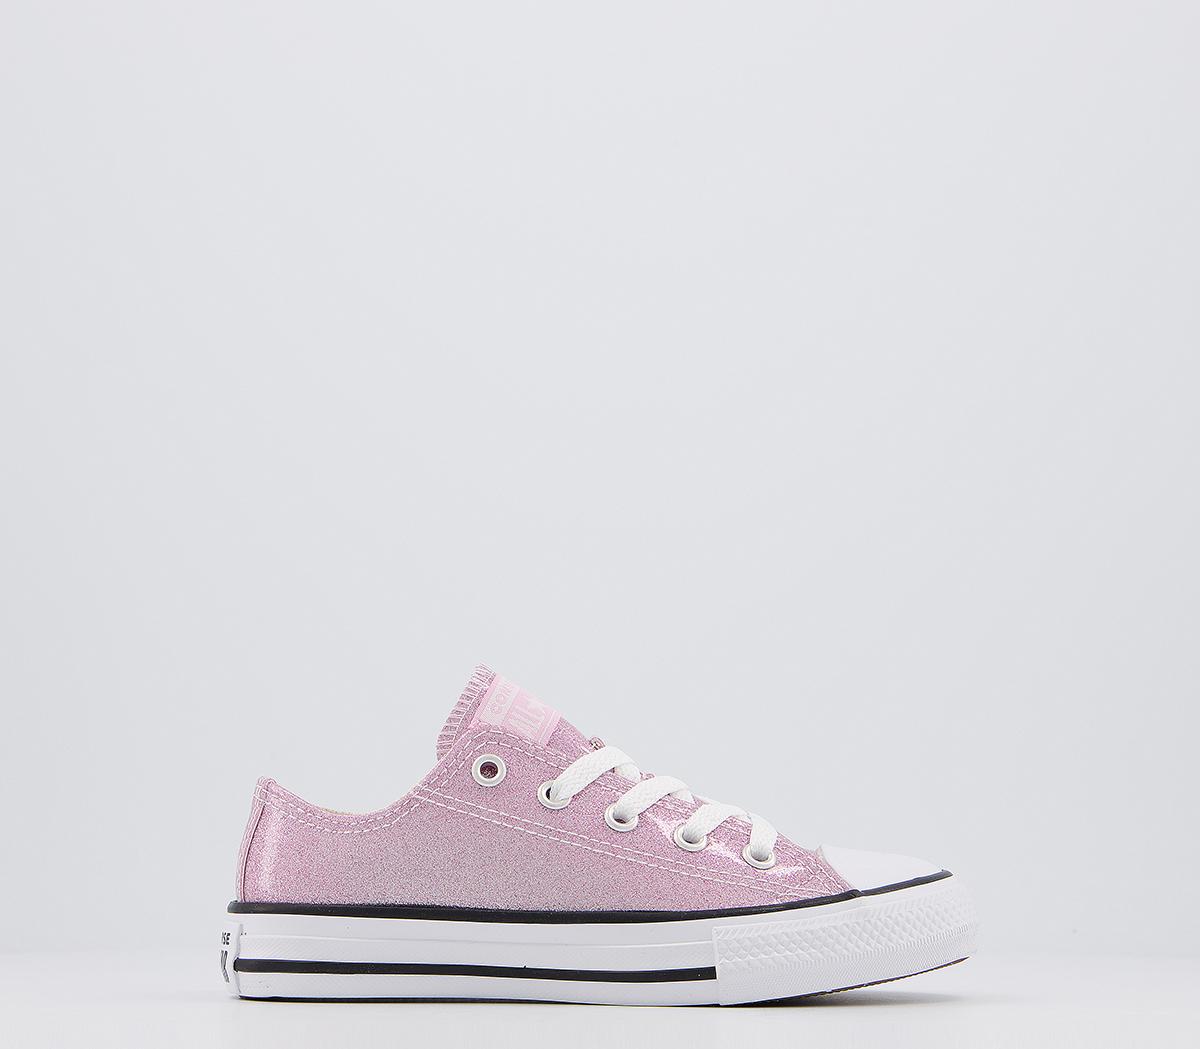 ConverseAll Star Low Youth TrainersPink Glaze Gliter